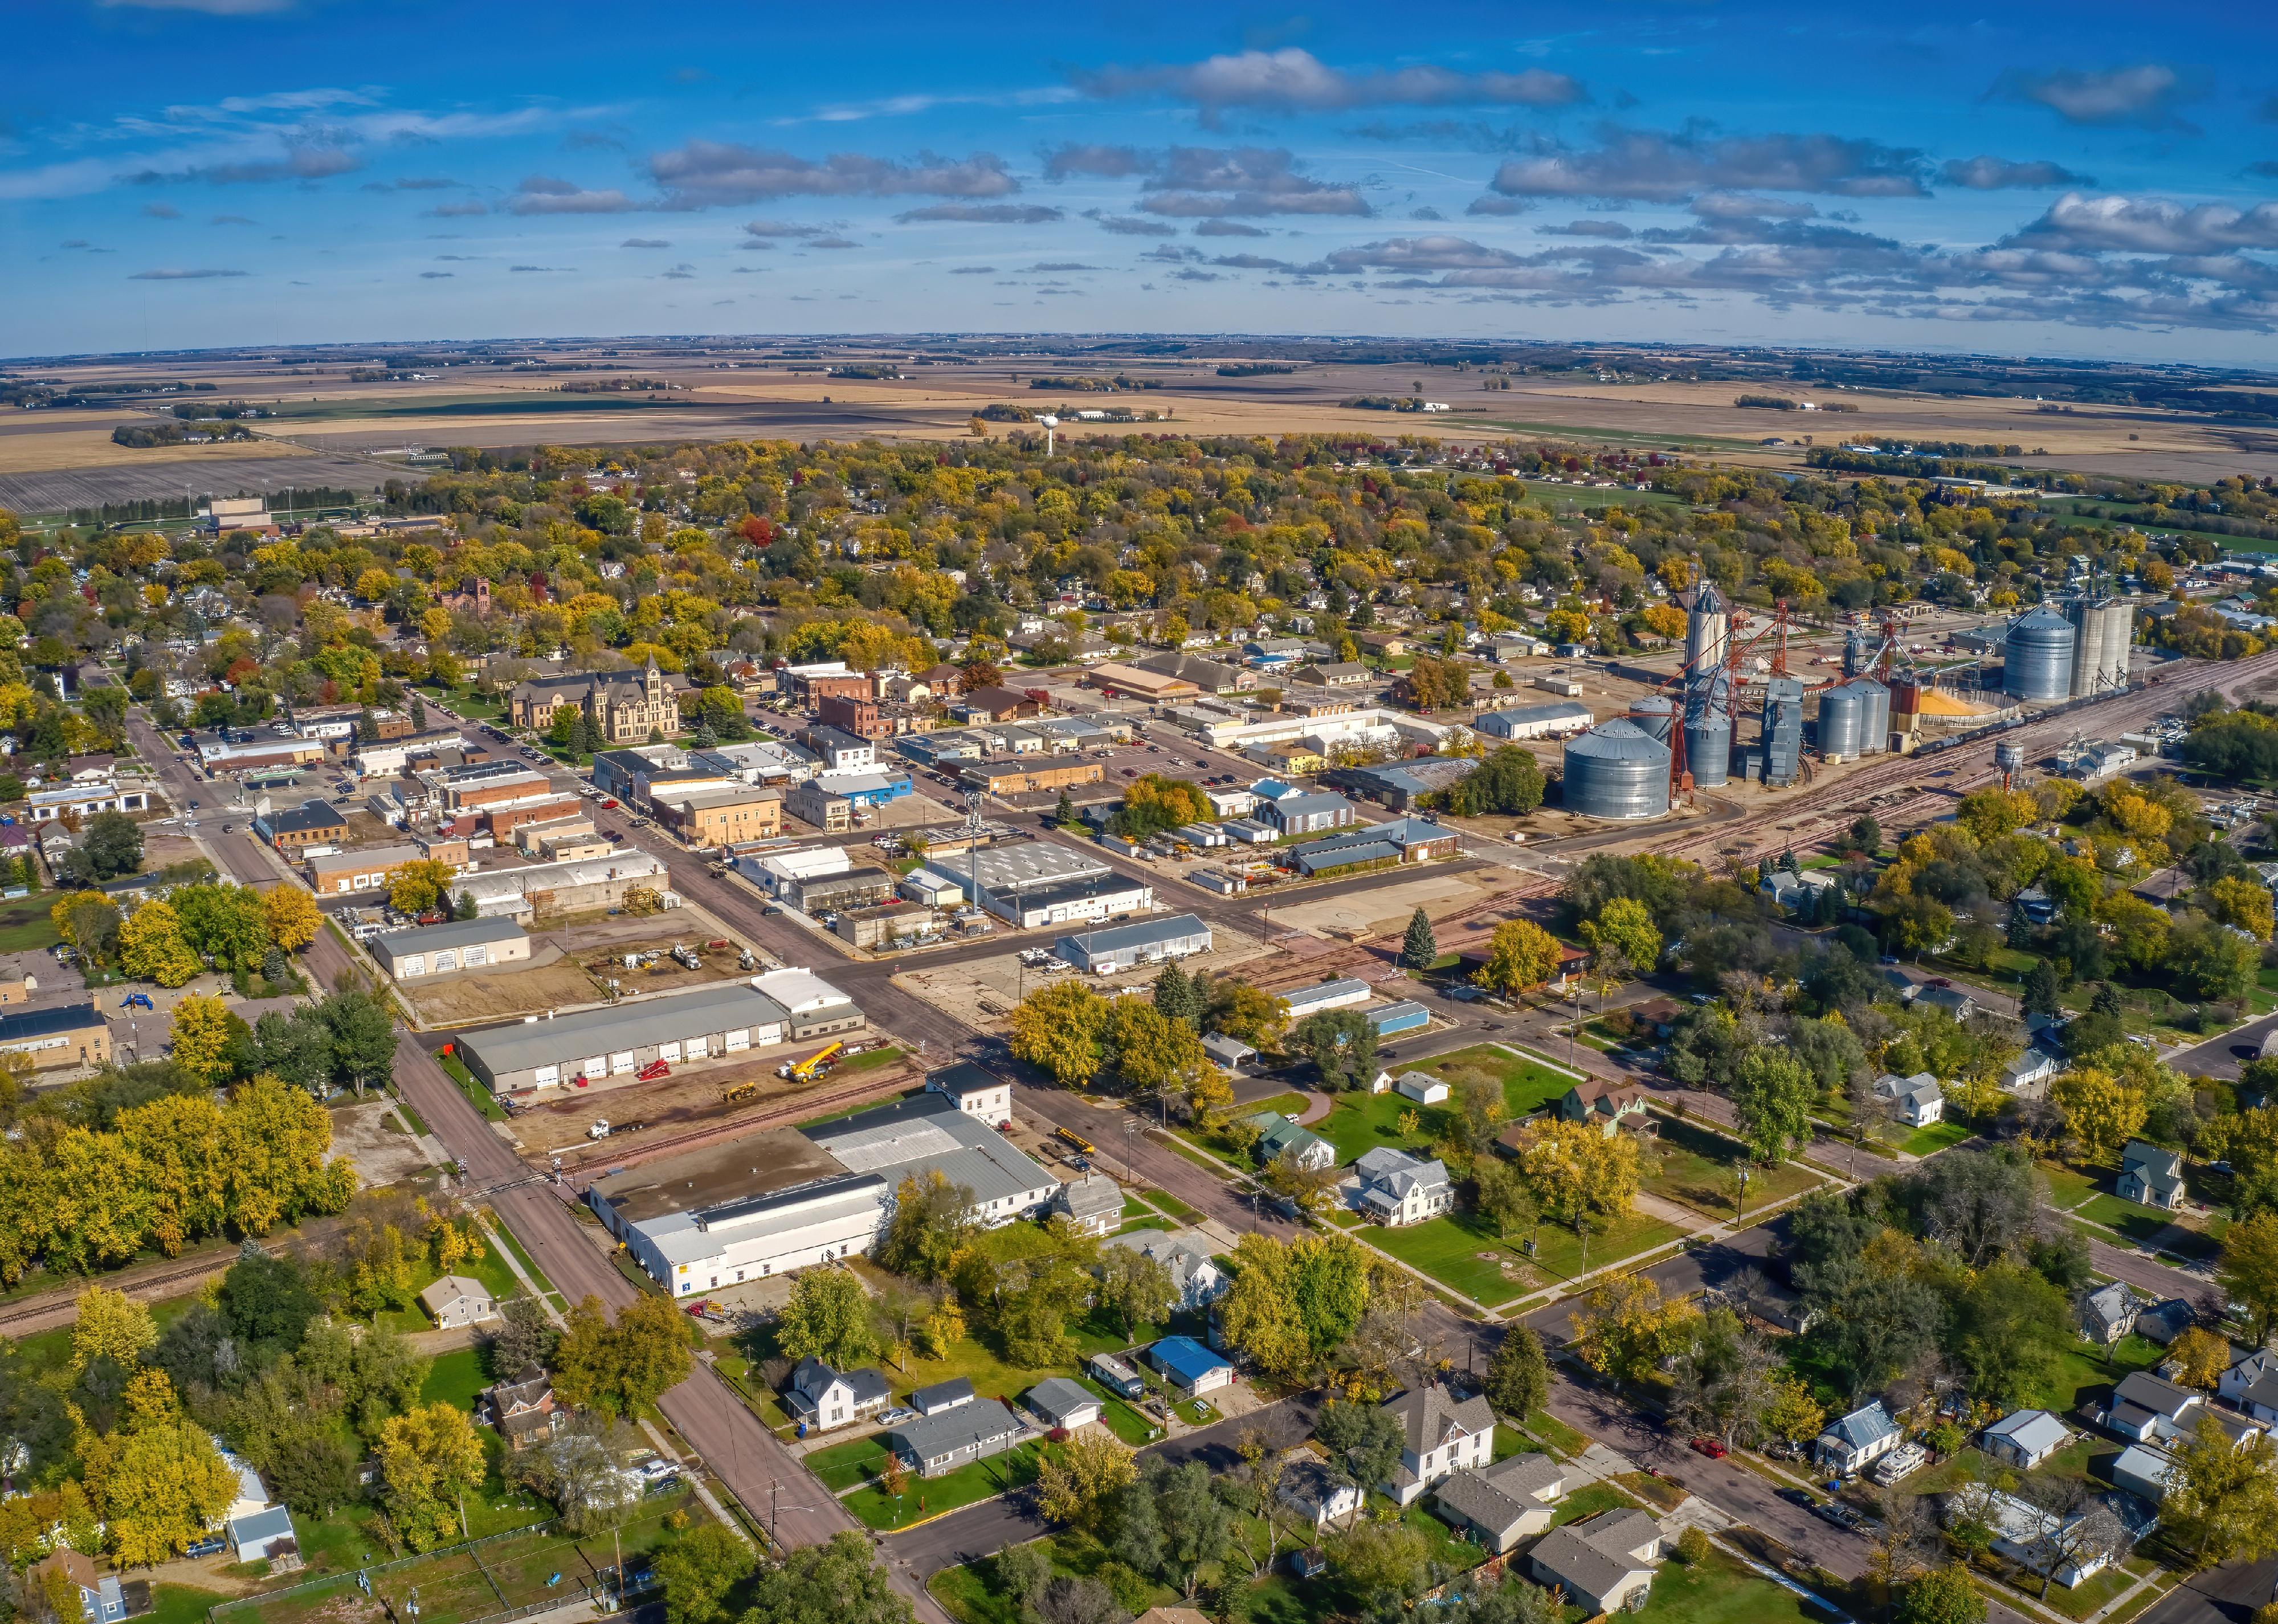 Aerial view of the Sioux Falls Suburb of Canton, South Dakota